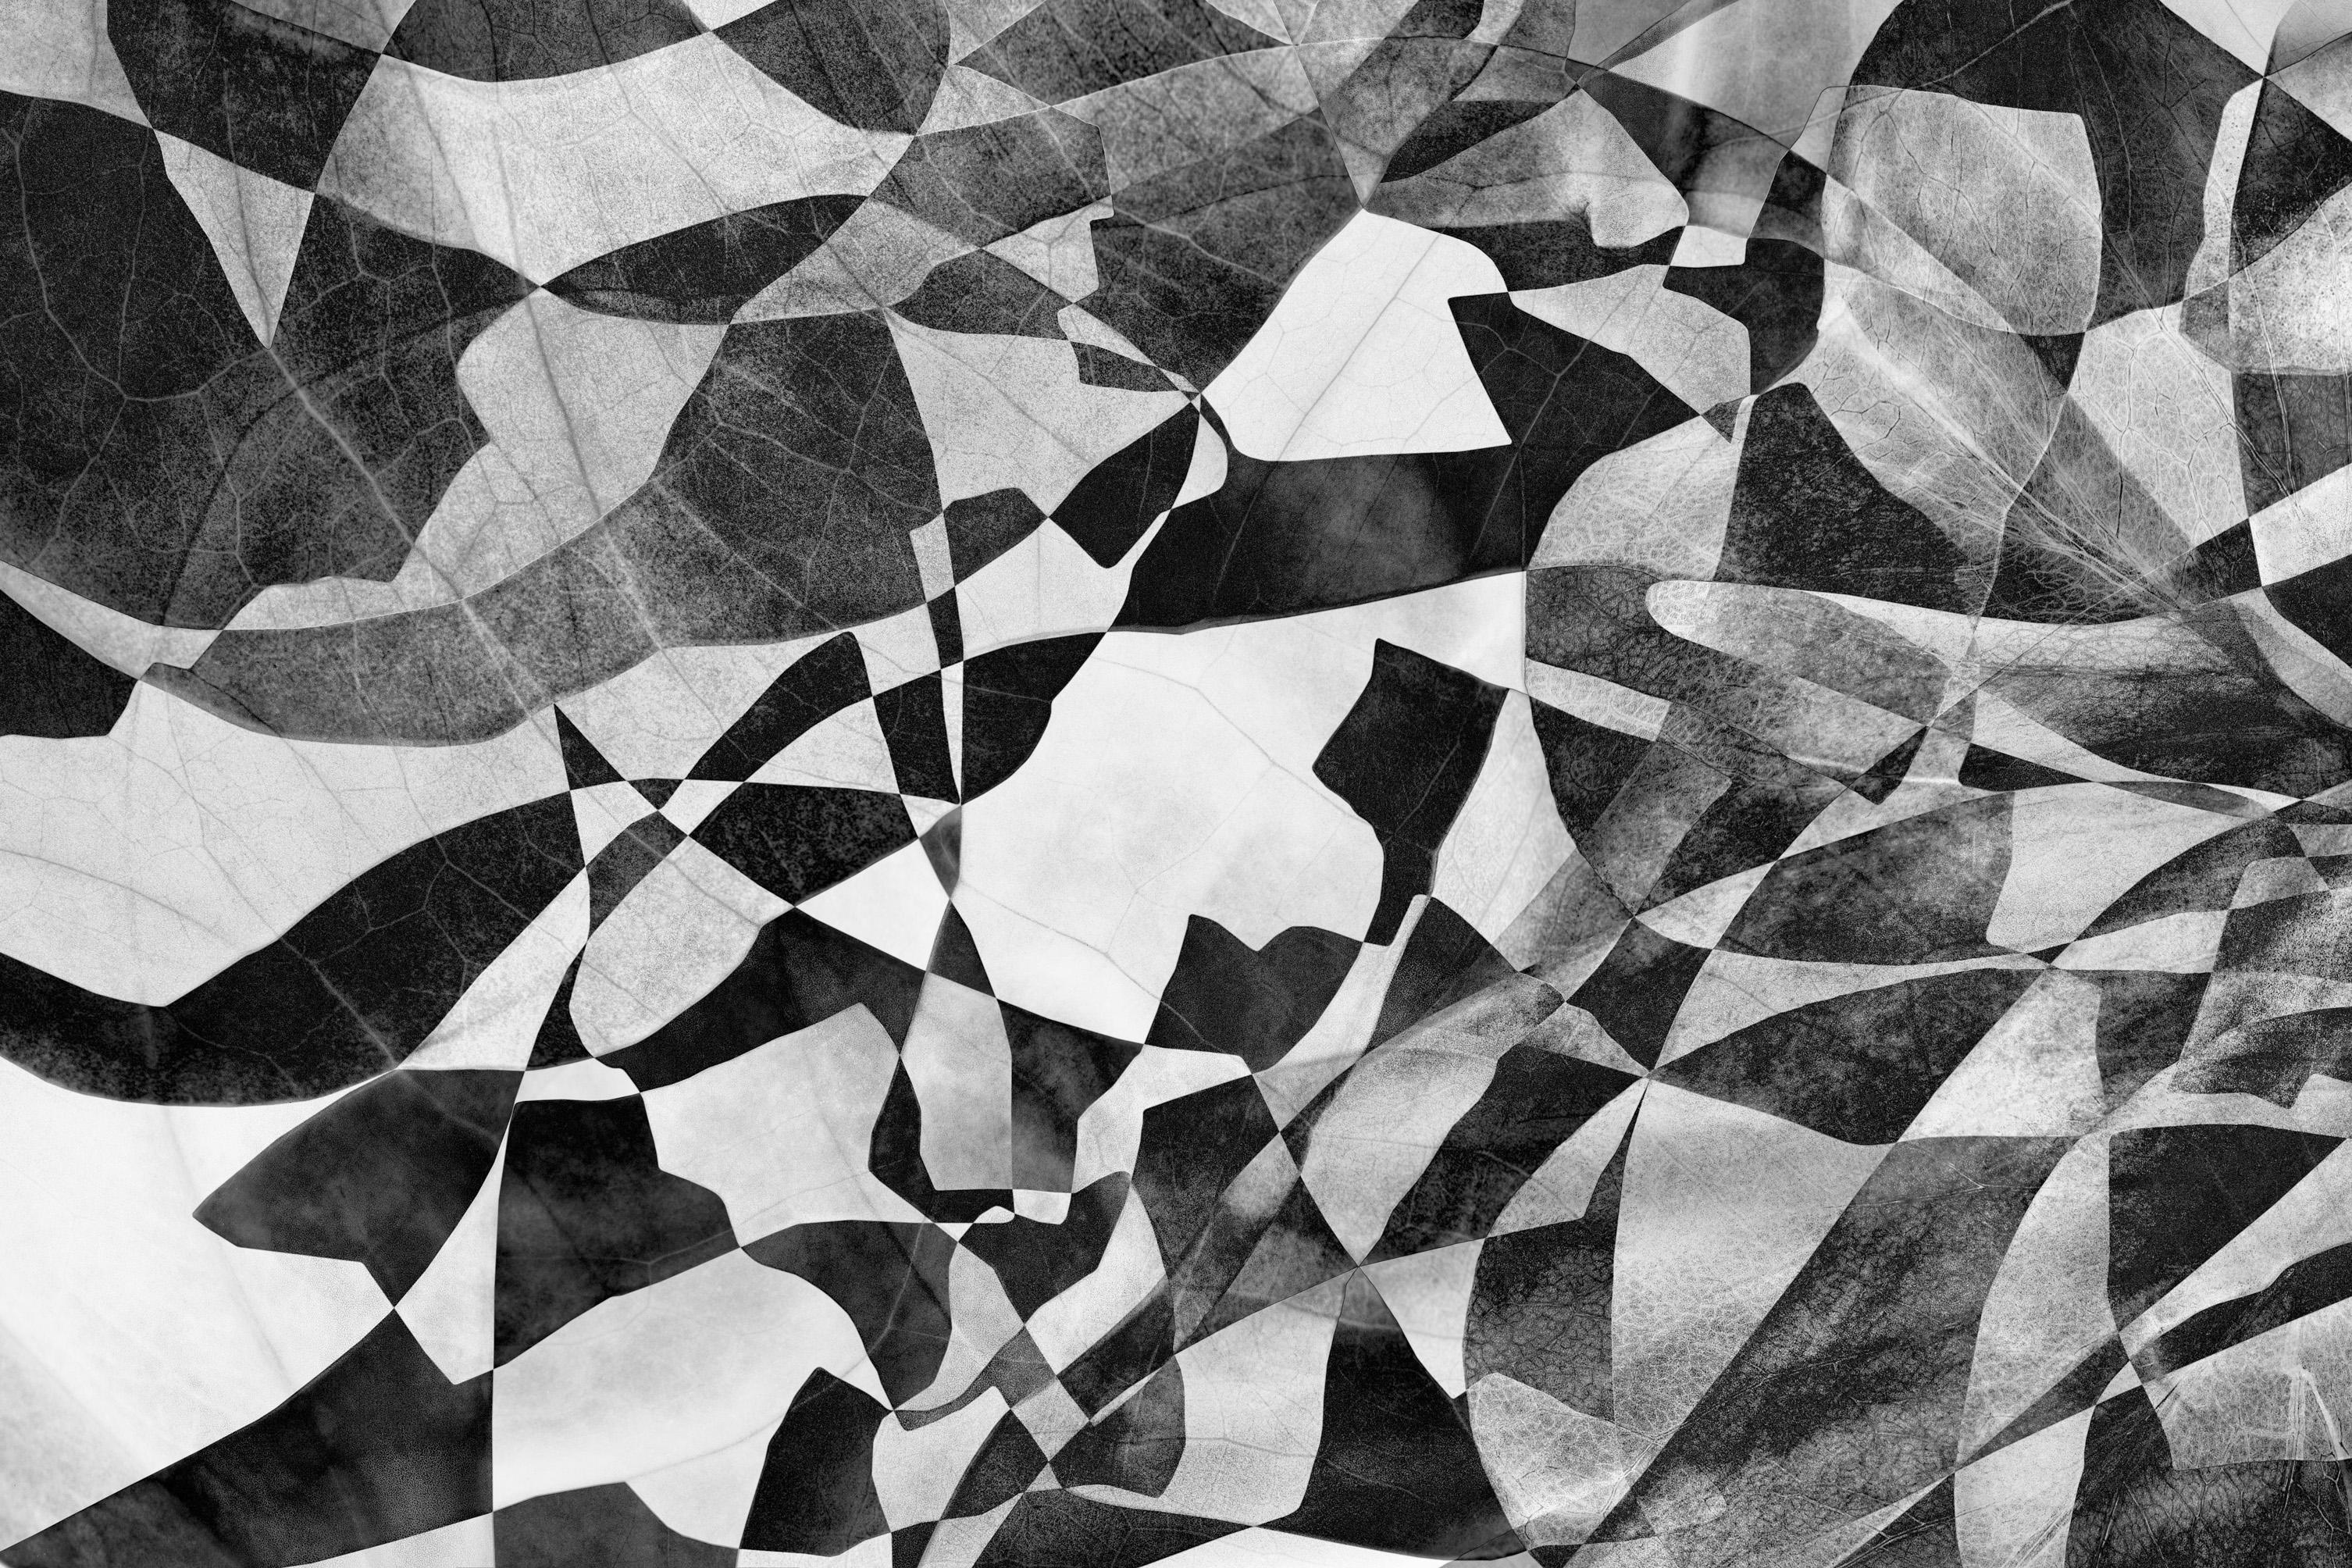 Feldforschung 07 - Contemporary Abstract Diamond Texture Photograph
Edition 3/3 + 1 AP
Photo print will be shipped with an adhesive label signed by the artist

After concentrating on modules of metropolises, Hubert Blanz comes for materials from